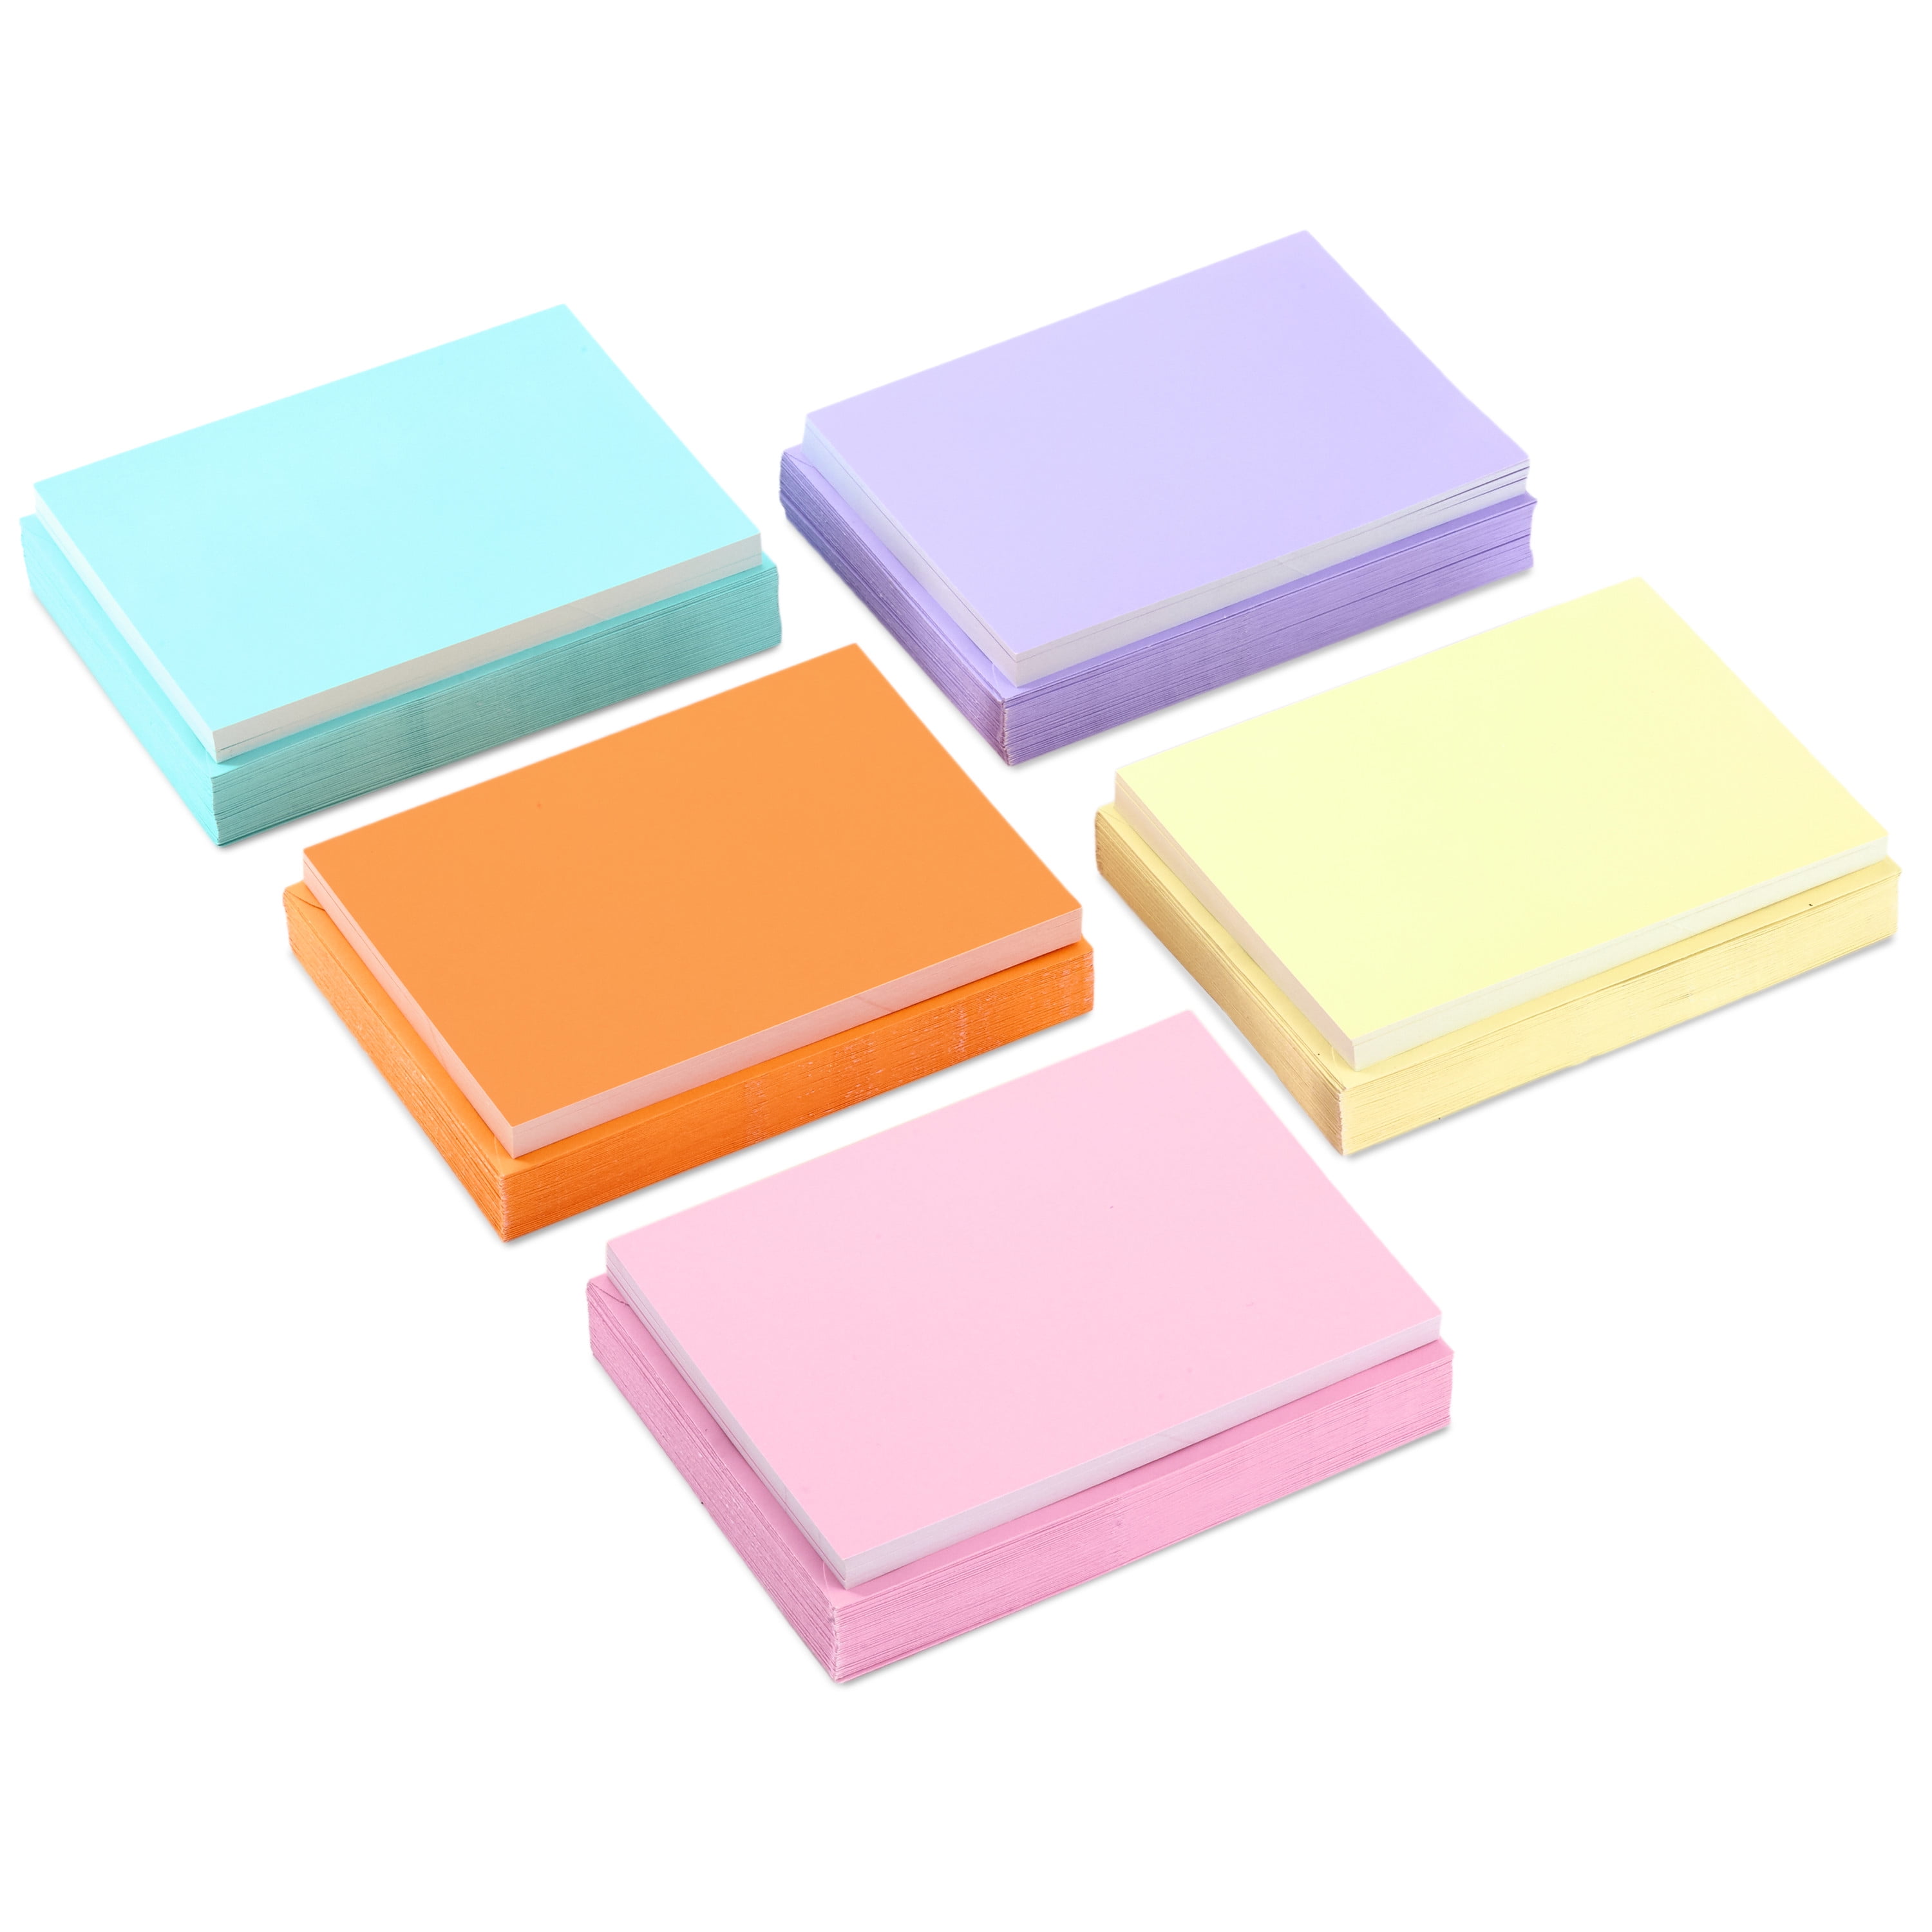 Hallmark Flat Blank Note Cards, Assorted Pastel Colors, 200 ct.